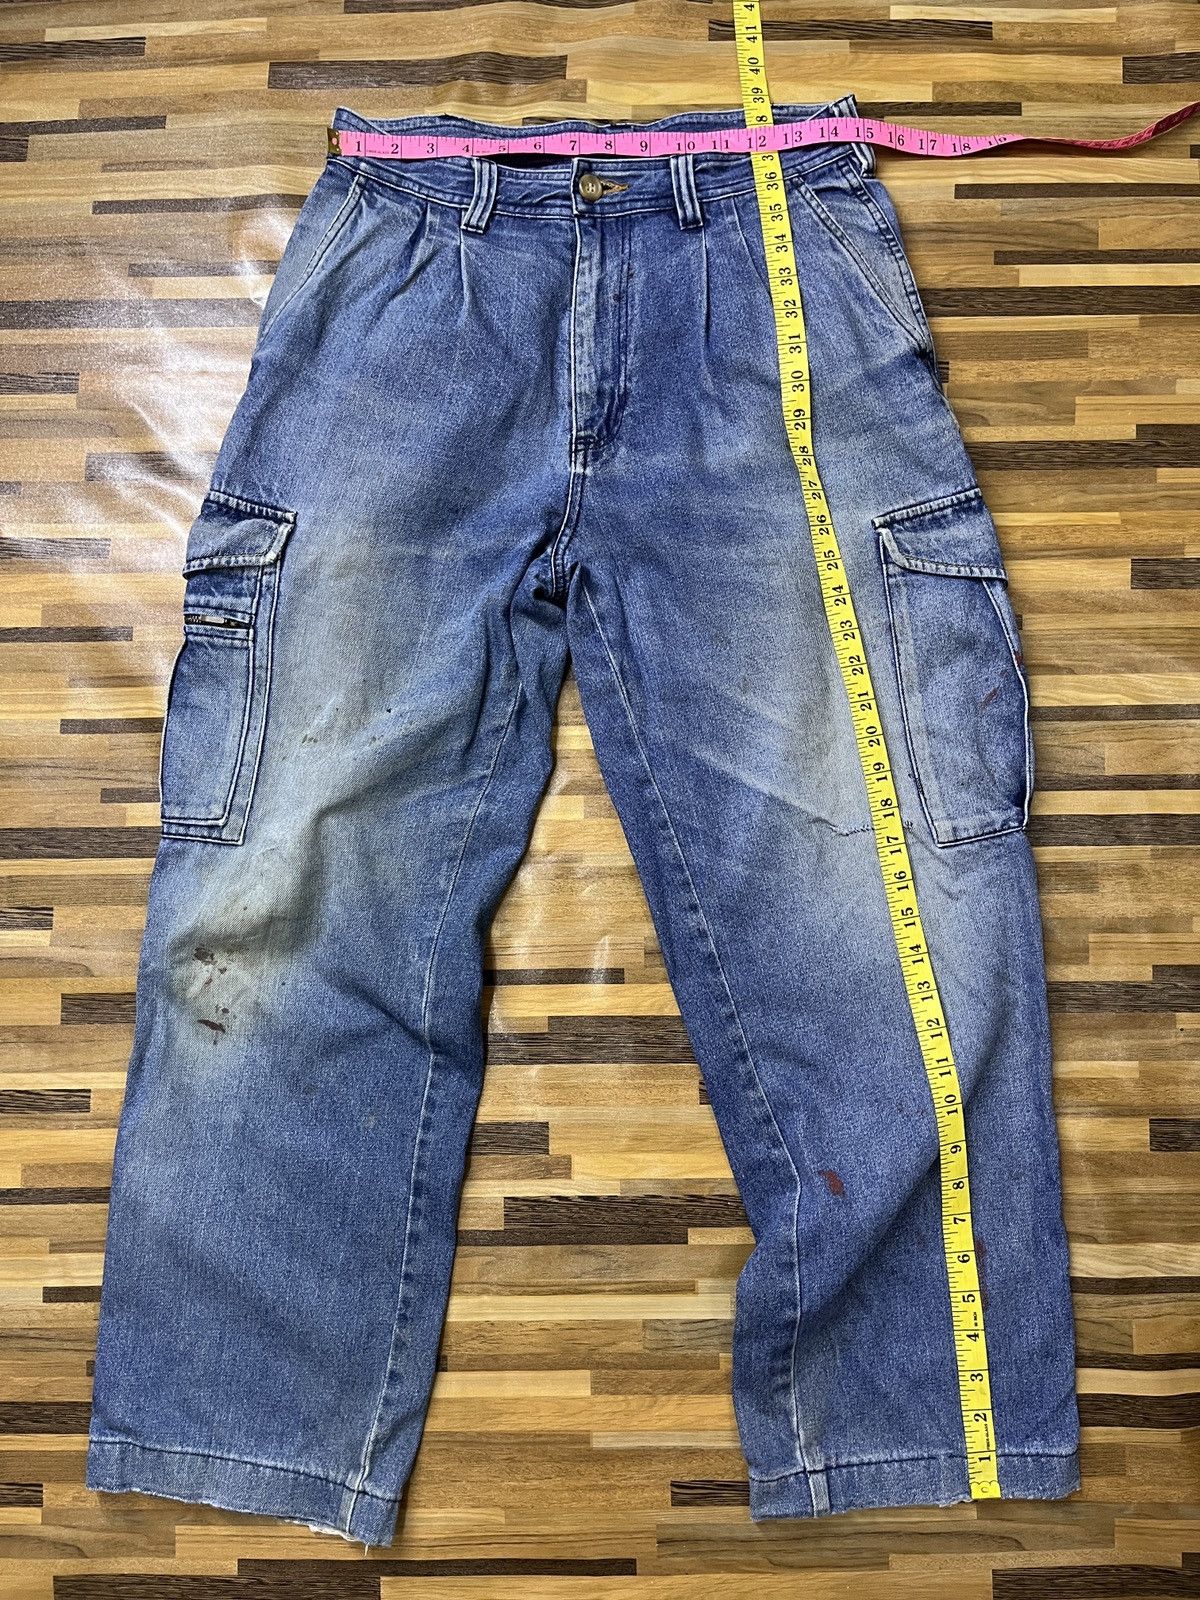 Distressed Denim - Worn Even River Japanese Cargo Denim Ripped Baggy Style - 4